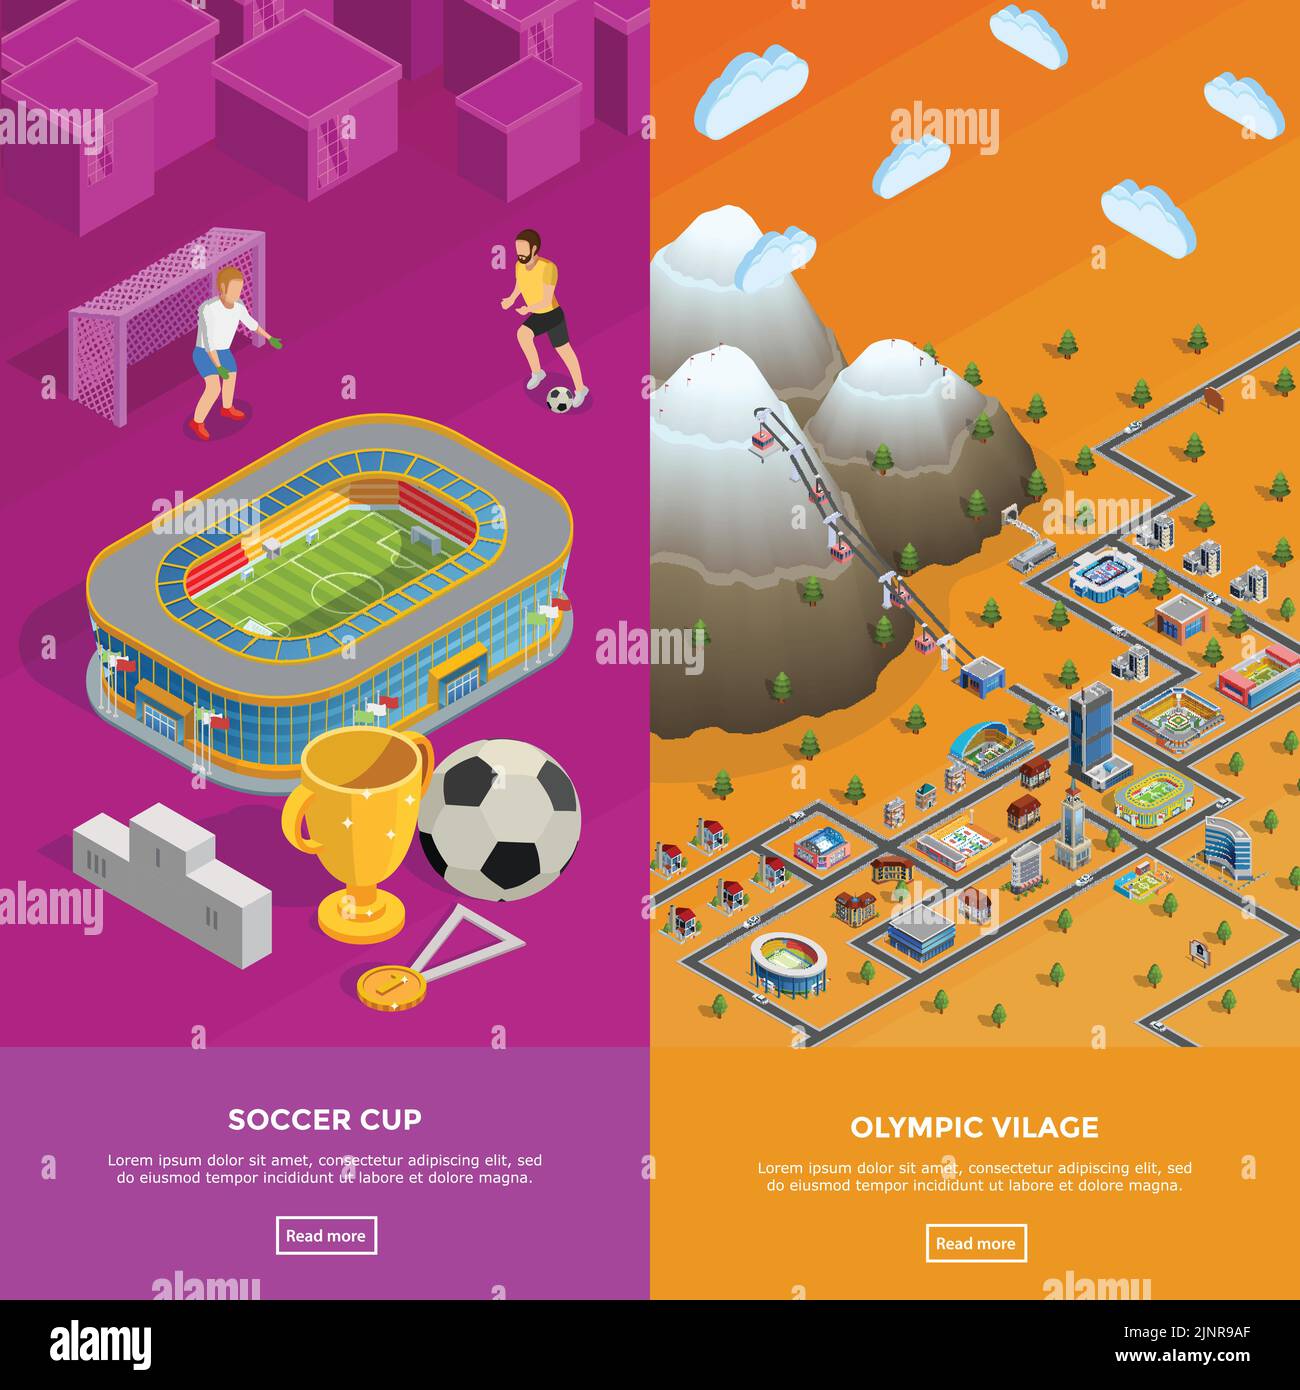 Olympic village park birds eye view and football cup soccer stadium 2 colorful isometric banners isolated vector illustration Stock Vector